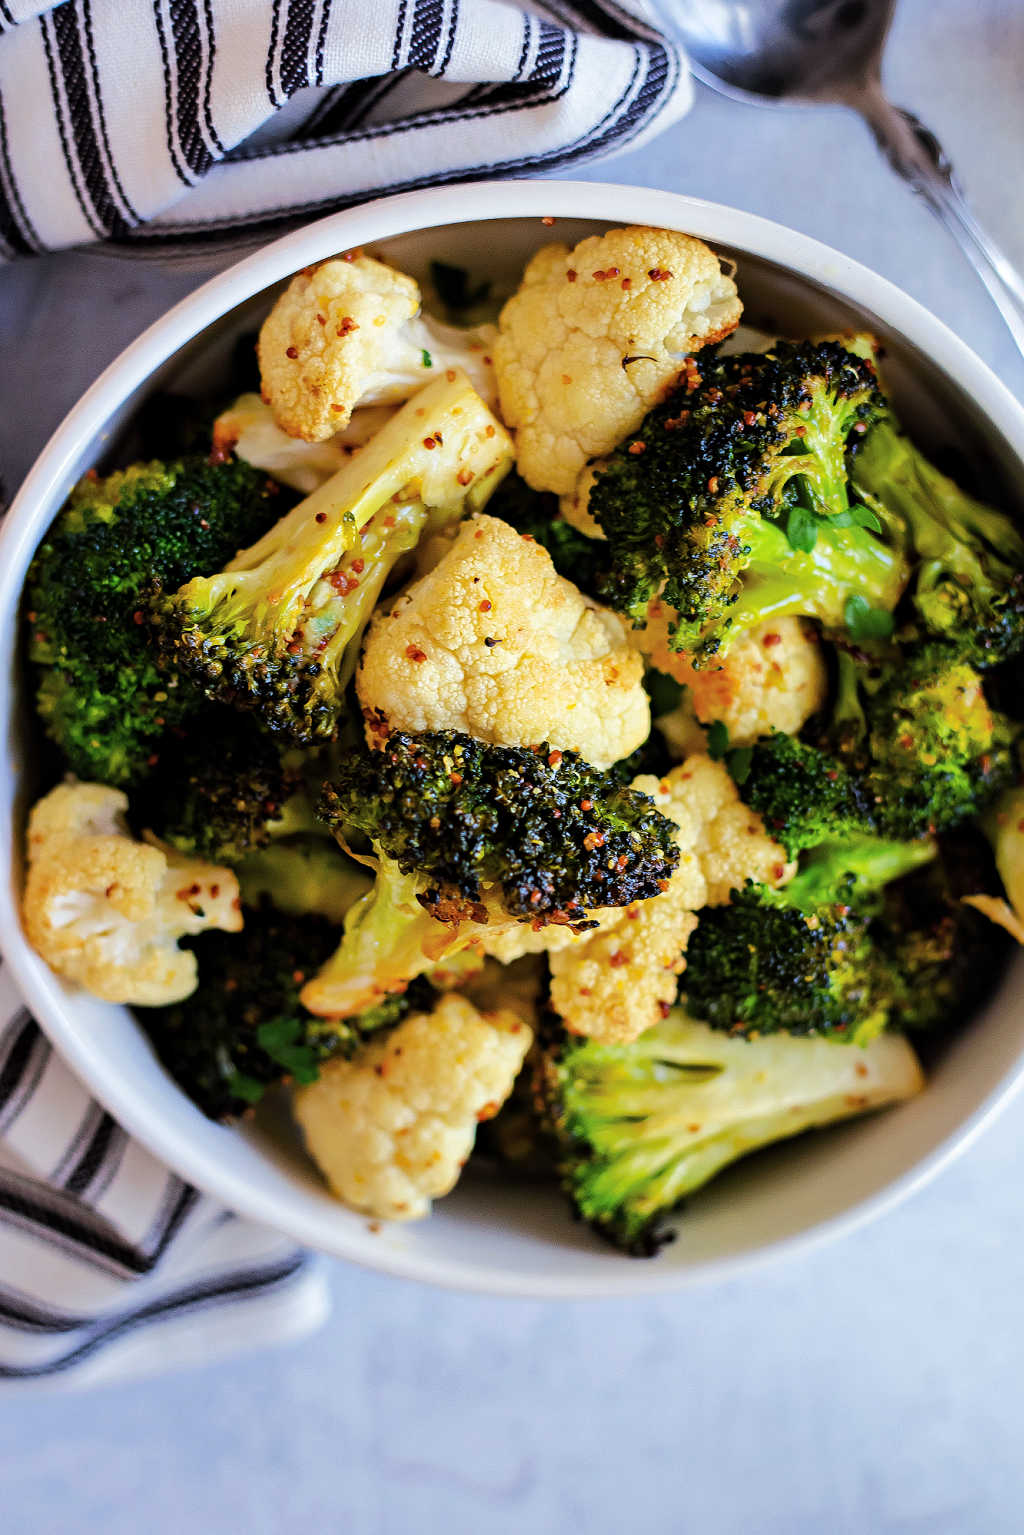 Lemon Mustard Roasted Broccoli and Cauliflower in a white bowl on a table